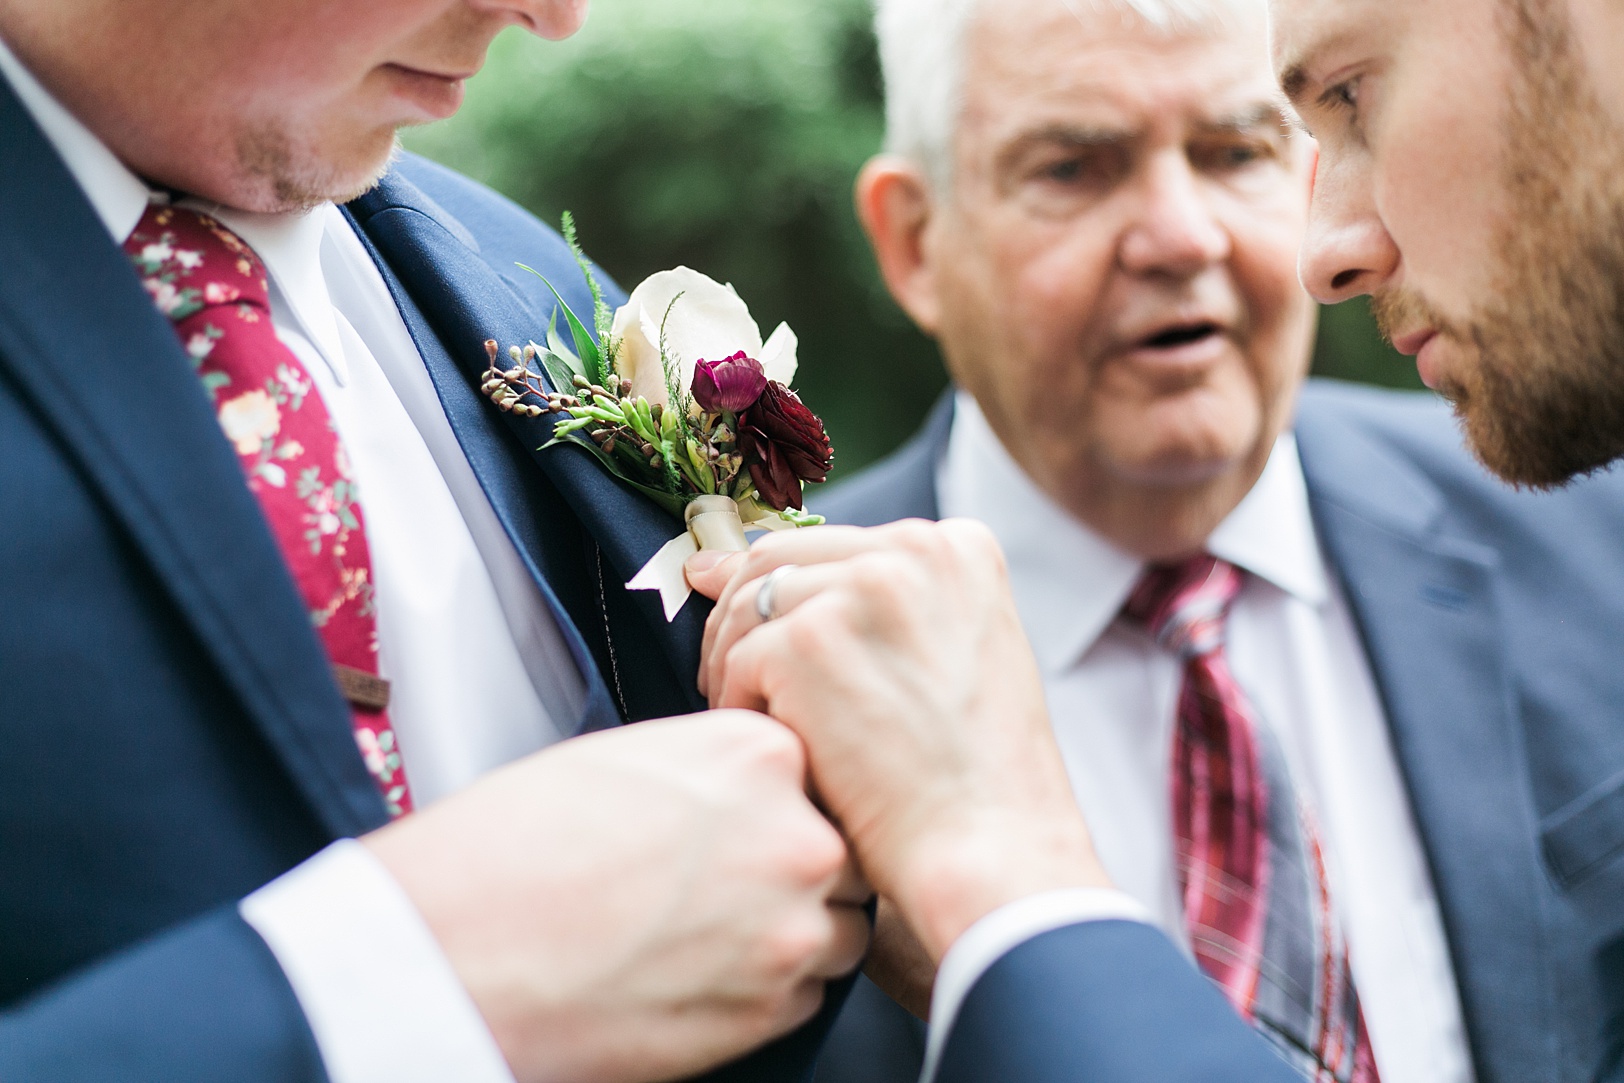 Groom Boutonniere Getting Ready | Kaitlin Scott Photography